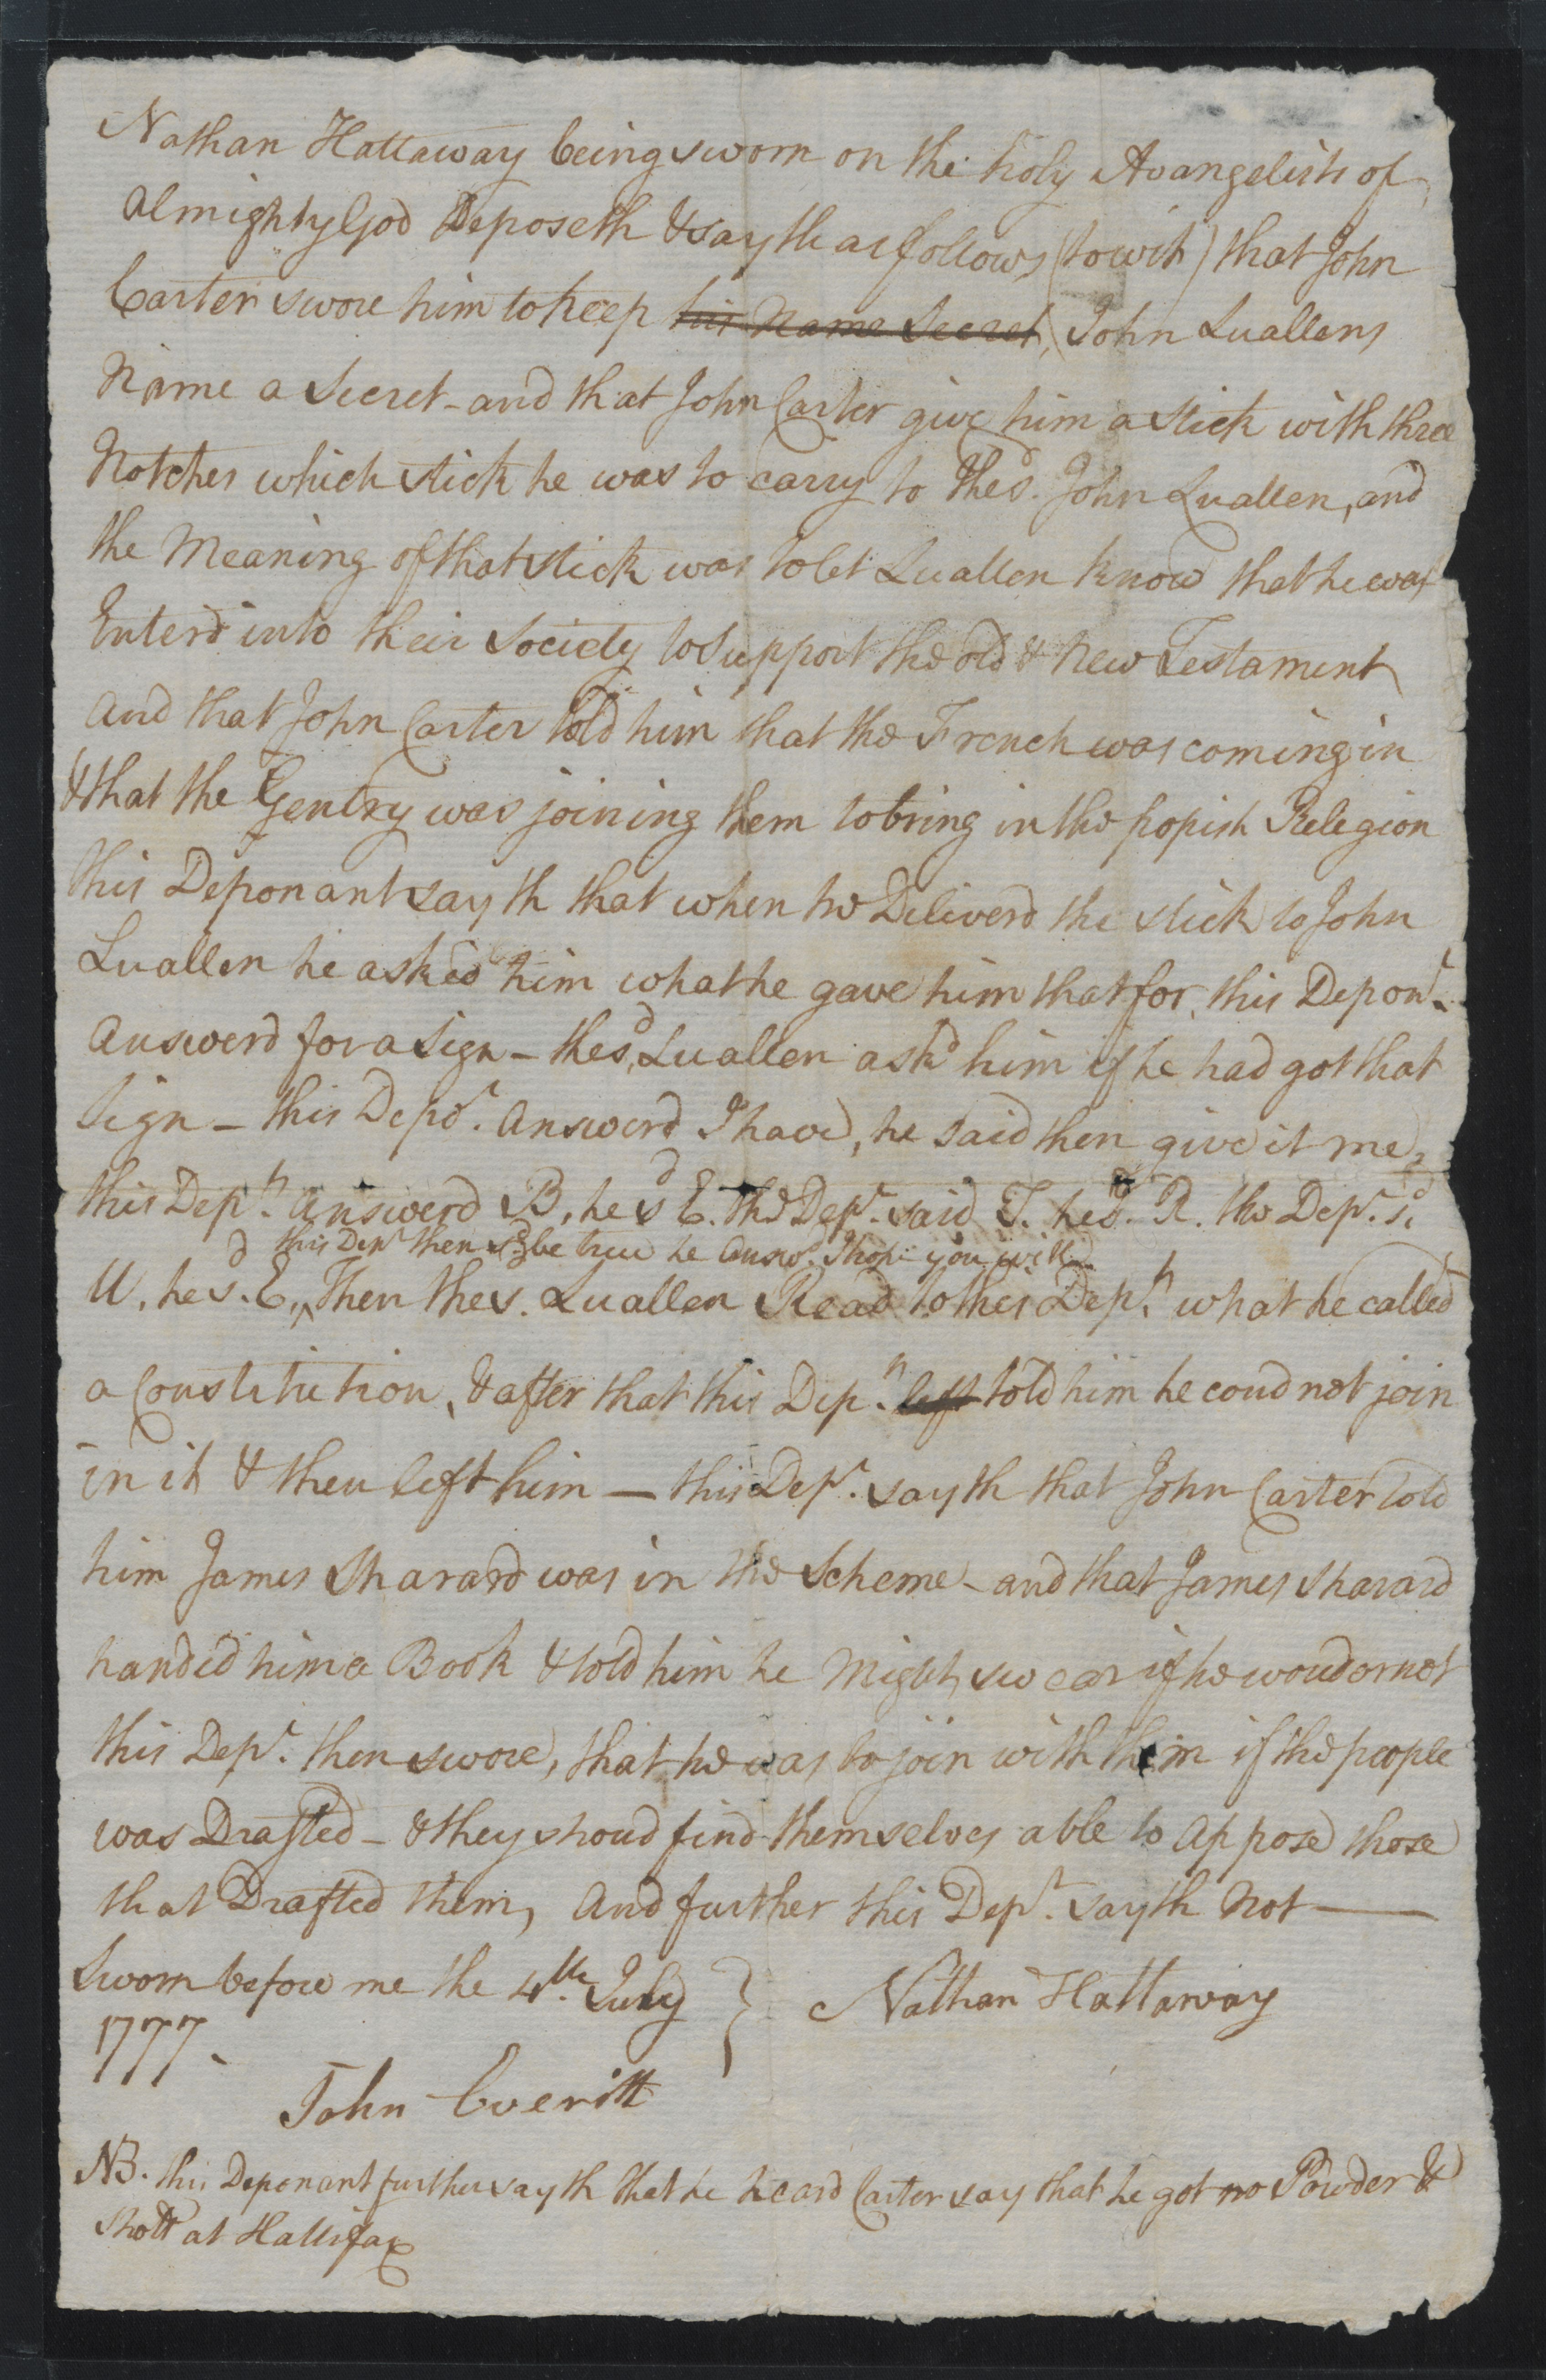 Deposition of Nathan Hallaway, 4 July 1777, page 1